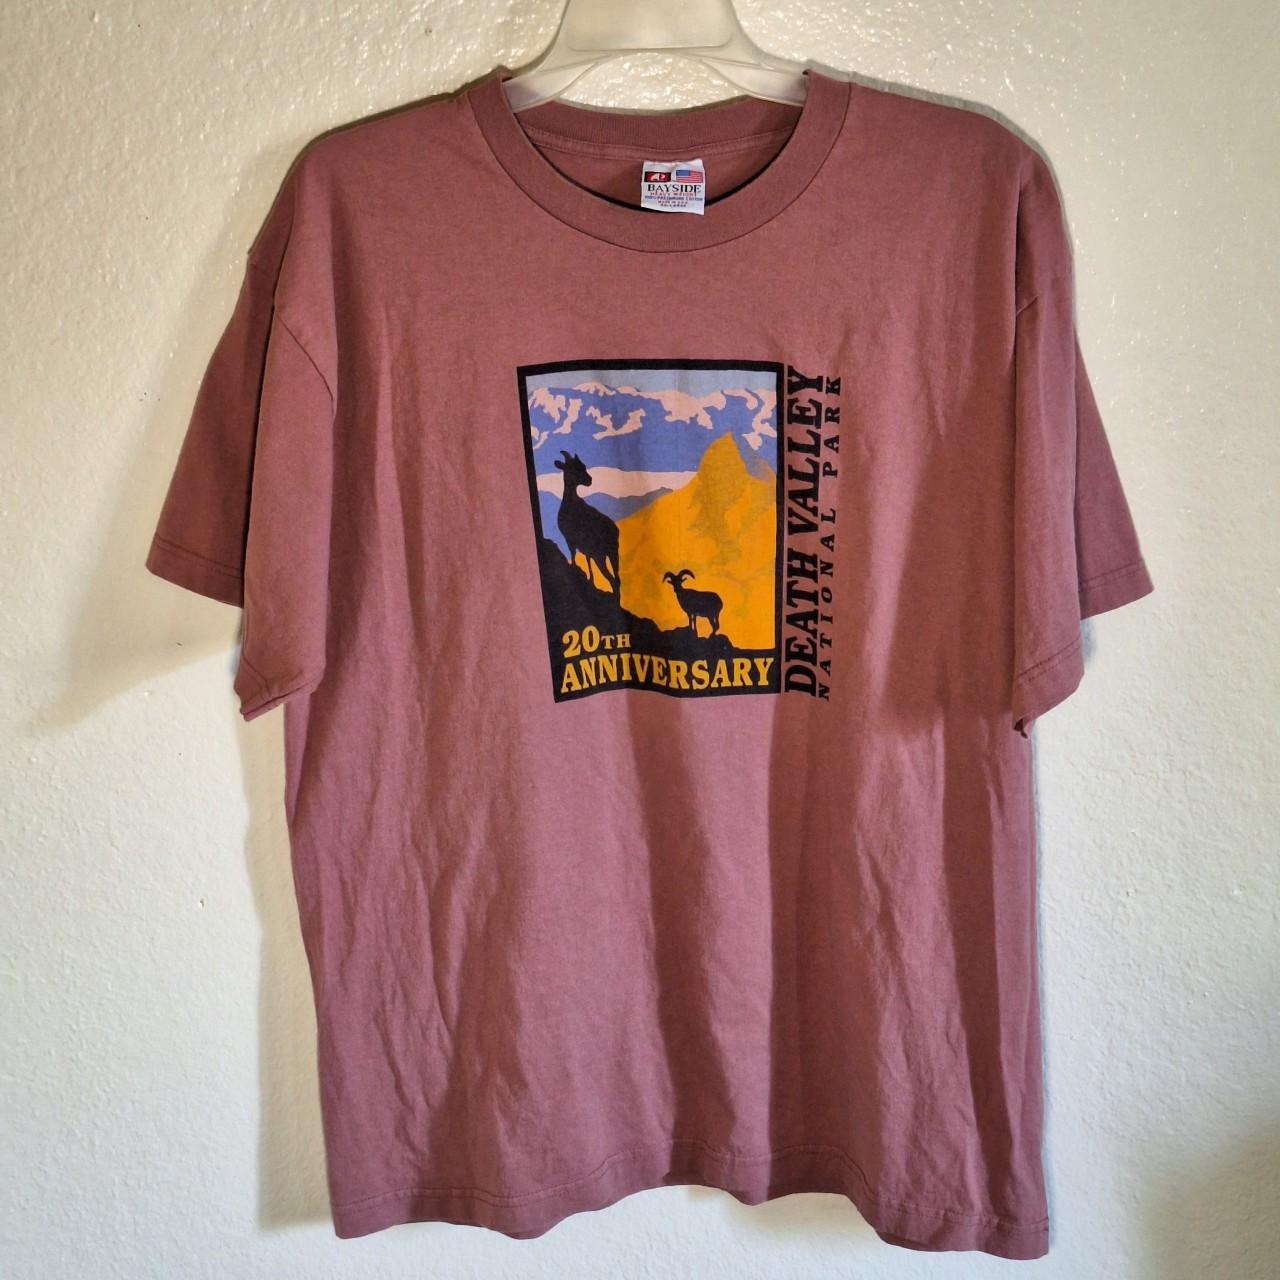 Death Valley T-shirt Nice National Park hit on the... - Depop